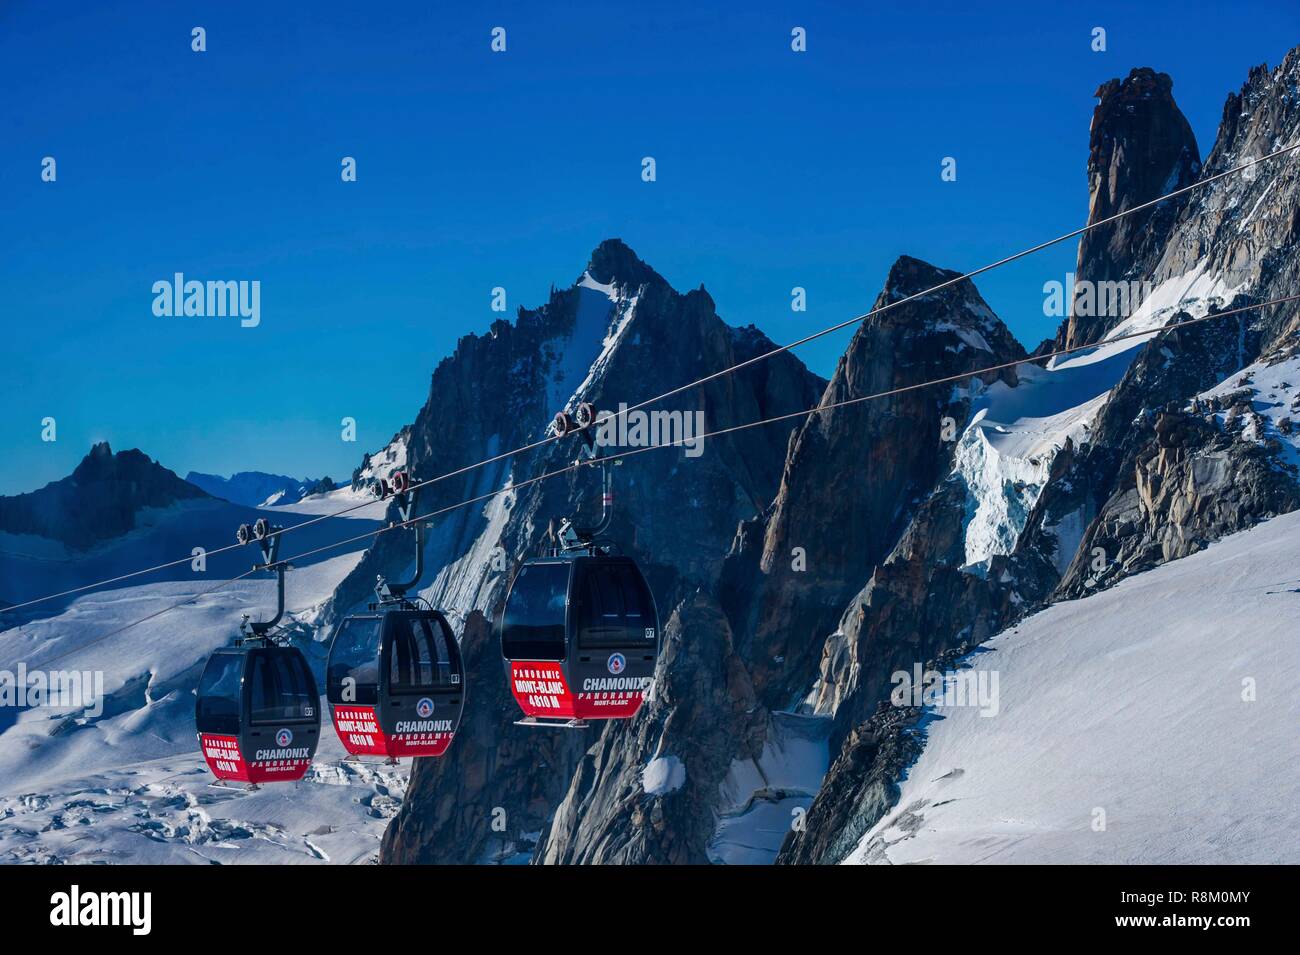 France, Haute-Savoie, Chamonix-Mont-Blanc and Courmayeur, Italy, cable-car of Panoramic-Mont-Blanc, linking the Aiguille du Midi to the Pointe Helbronner on the italian side of Mont-Blanc, overlooking the Piémont and the Val d'Aoste Stock Photo